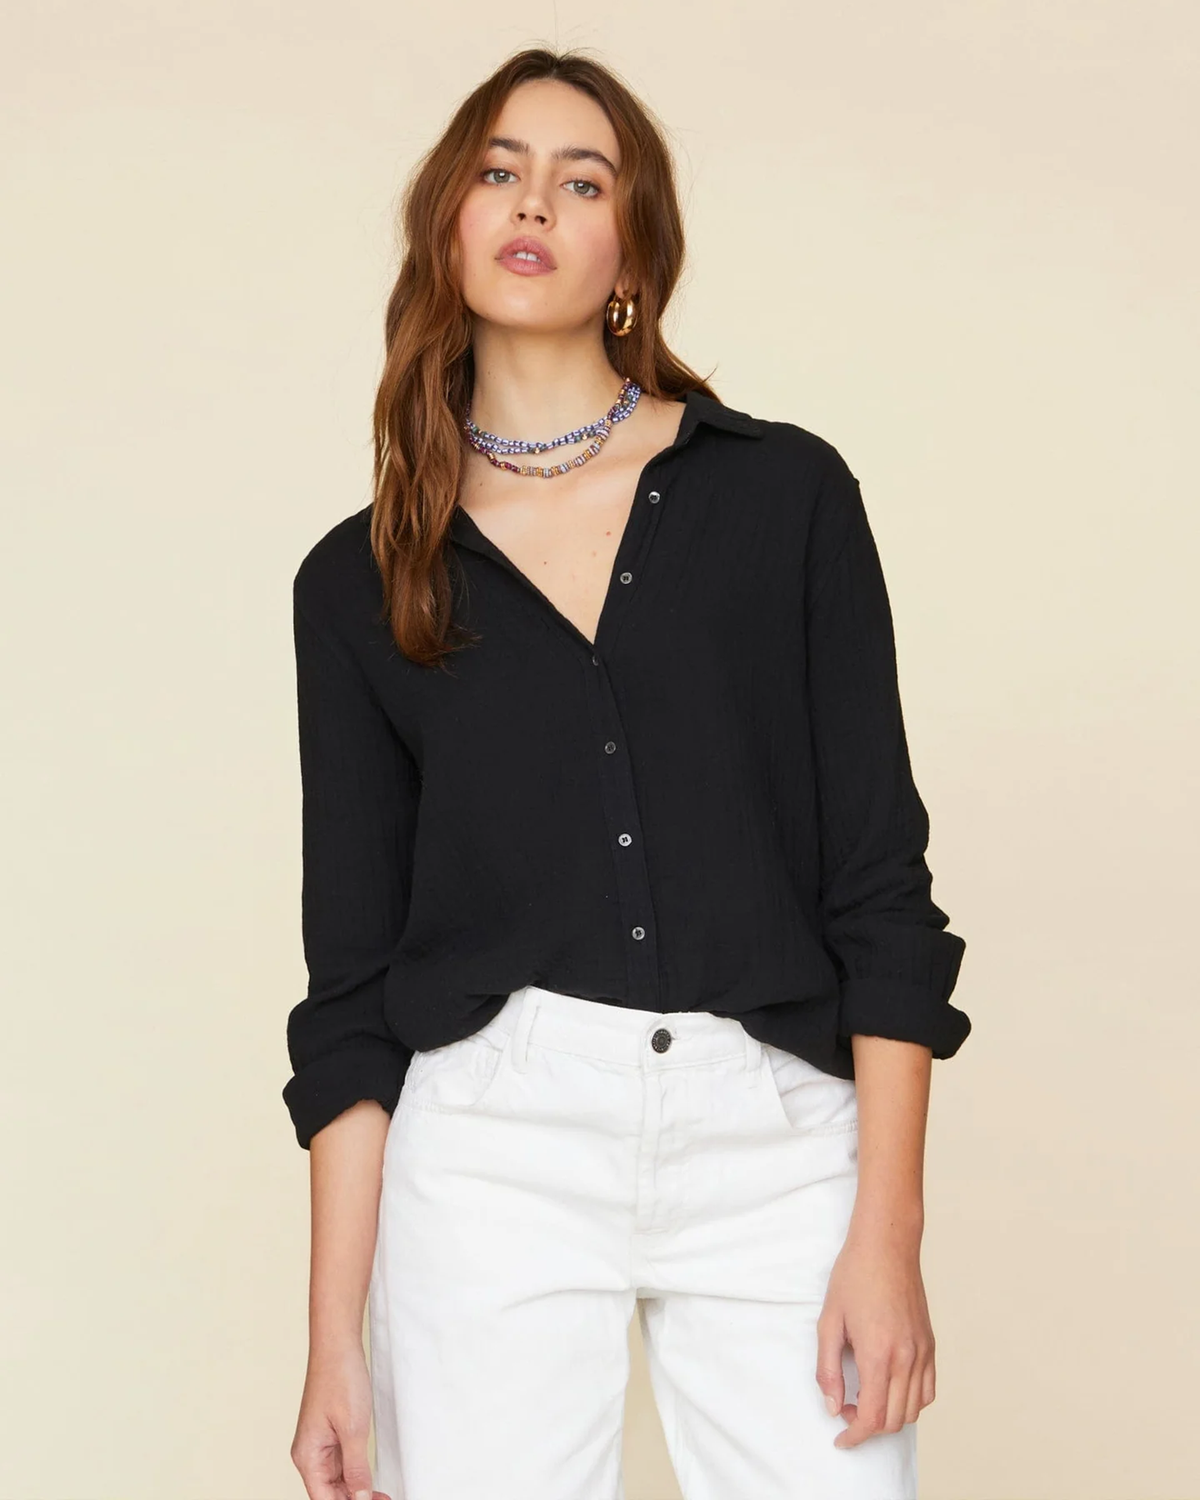 Scout Top in Black